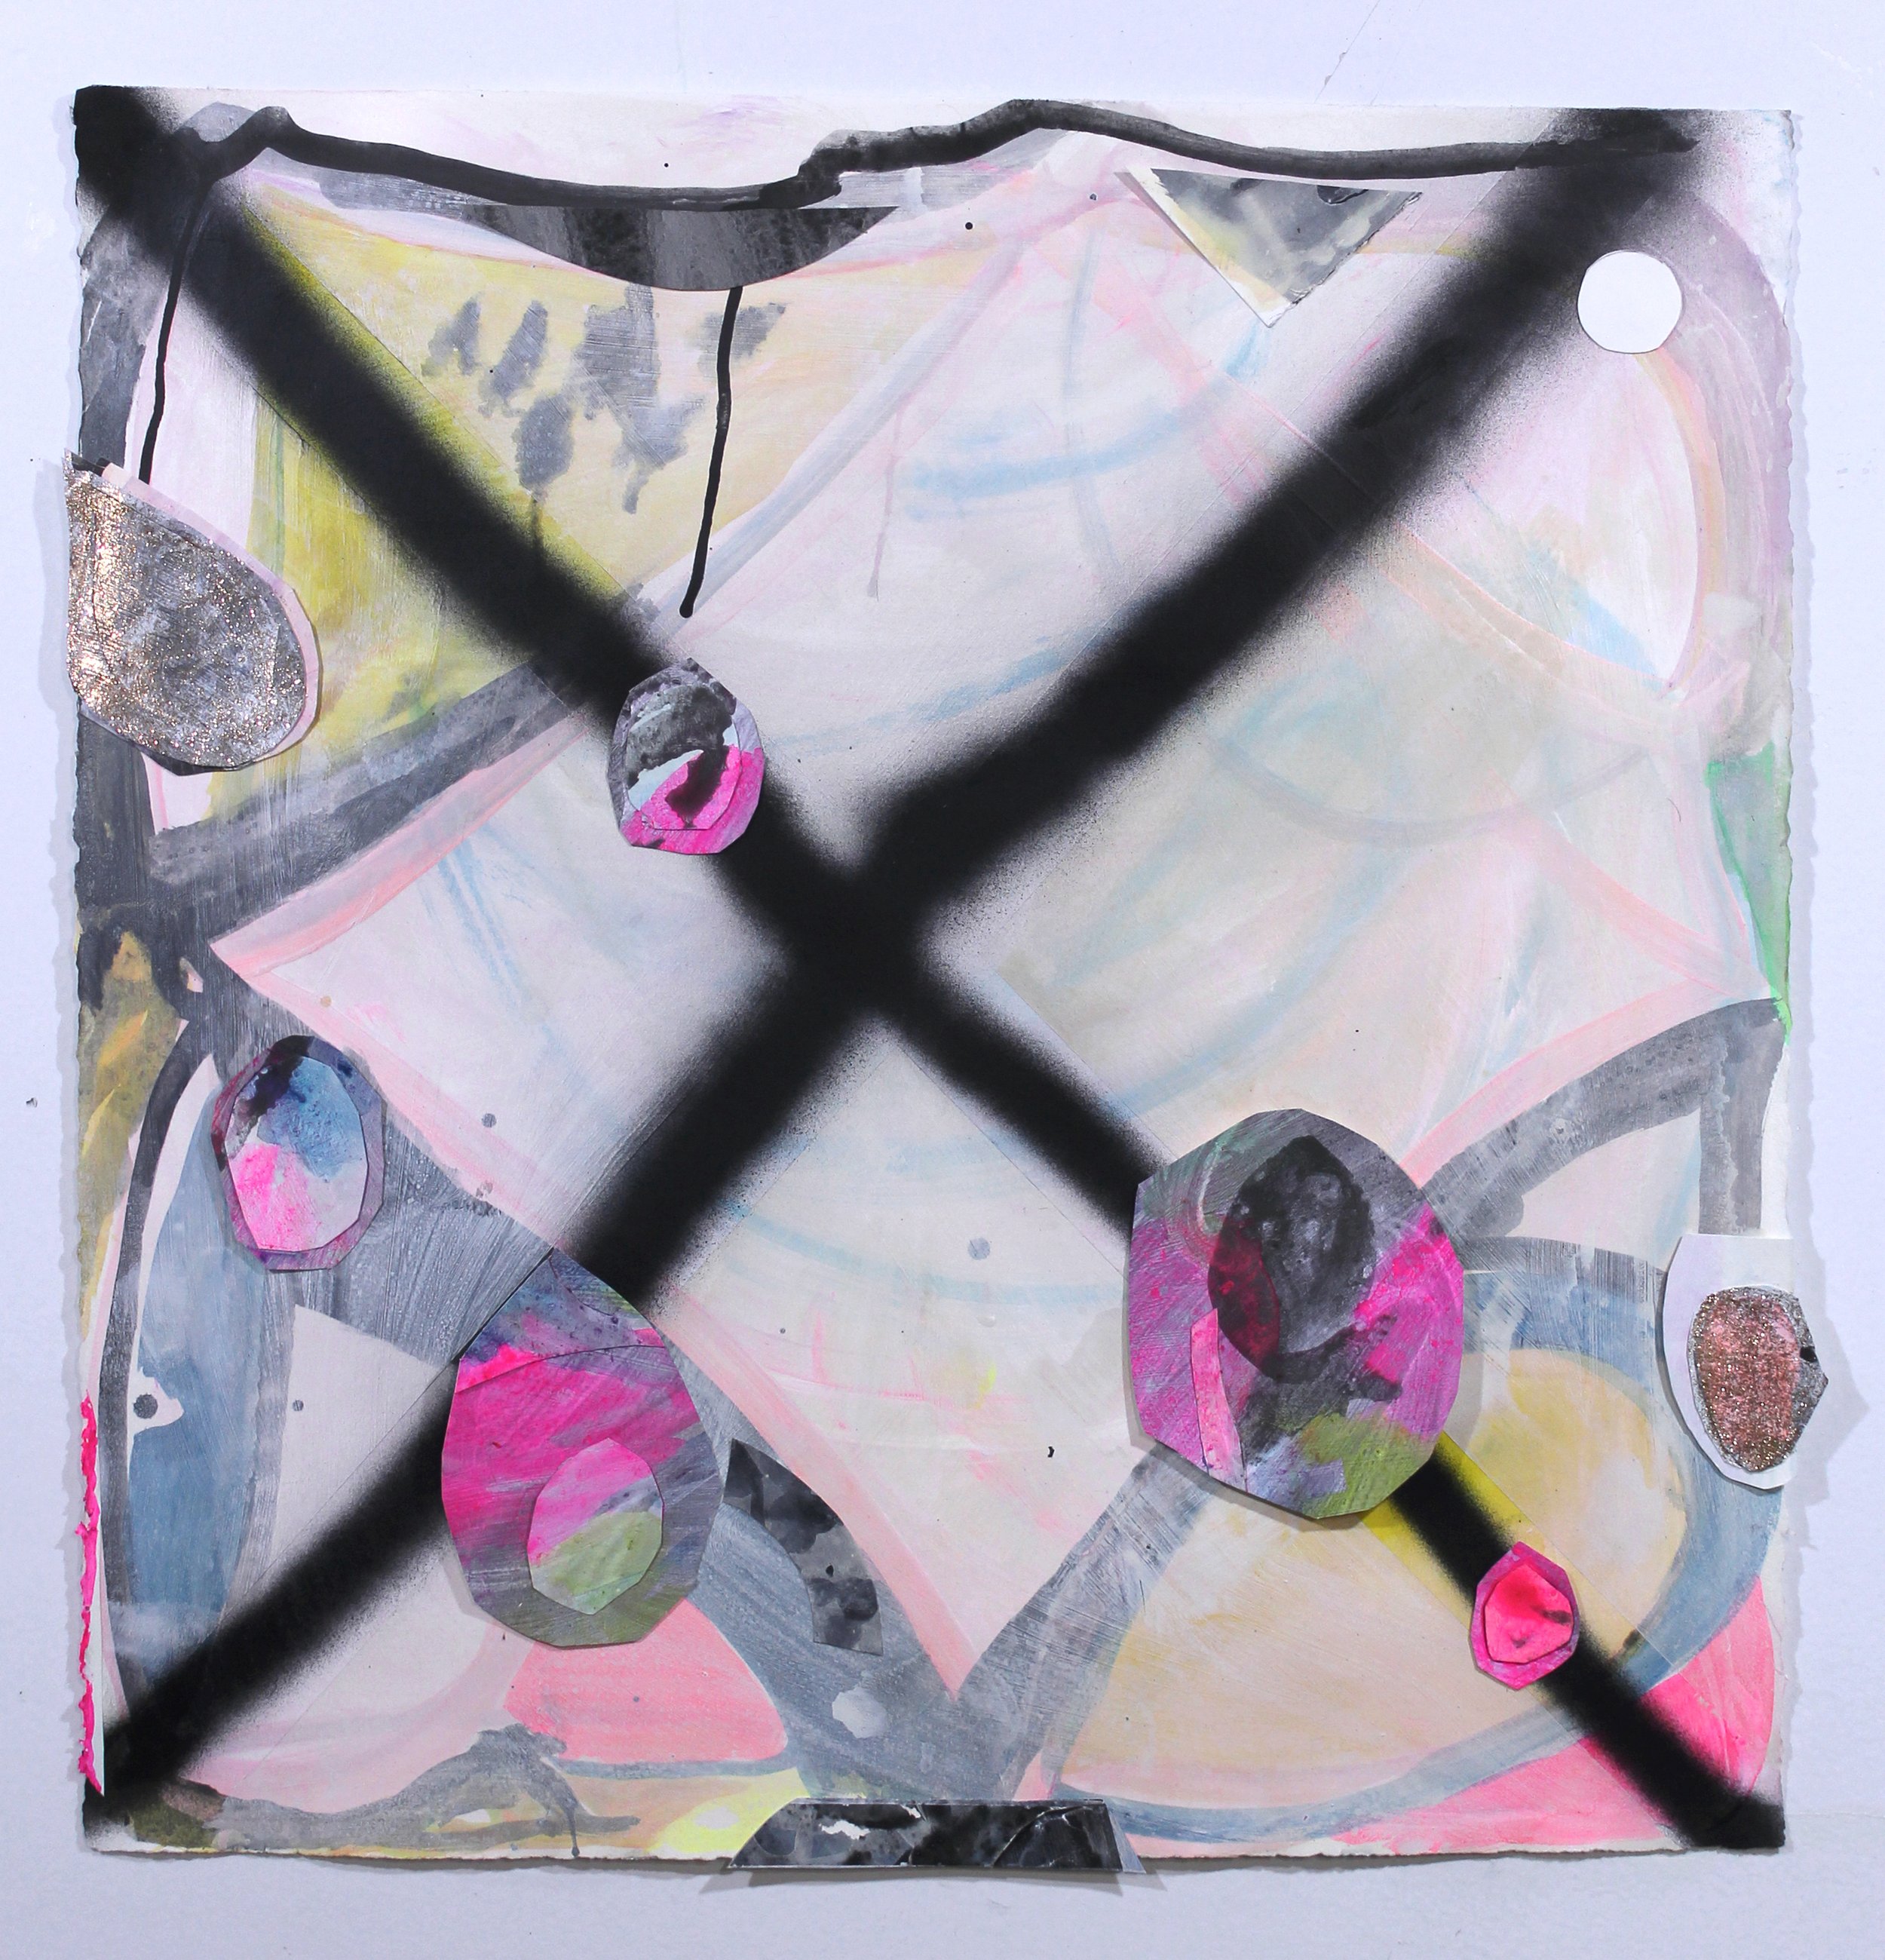   Extricate , 2020 Graphite powder, gouache, acrylic, watercolor, canvas, glitter paint and collage on paper 27 ½ x 27 inches  